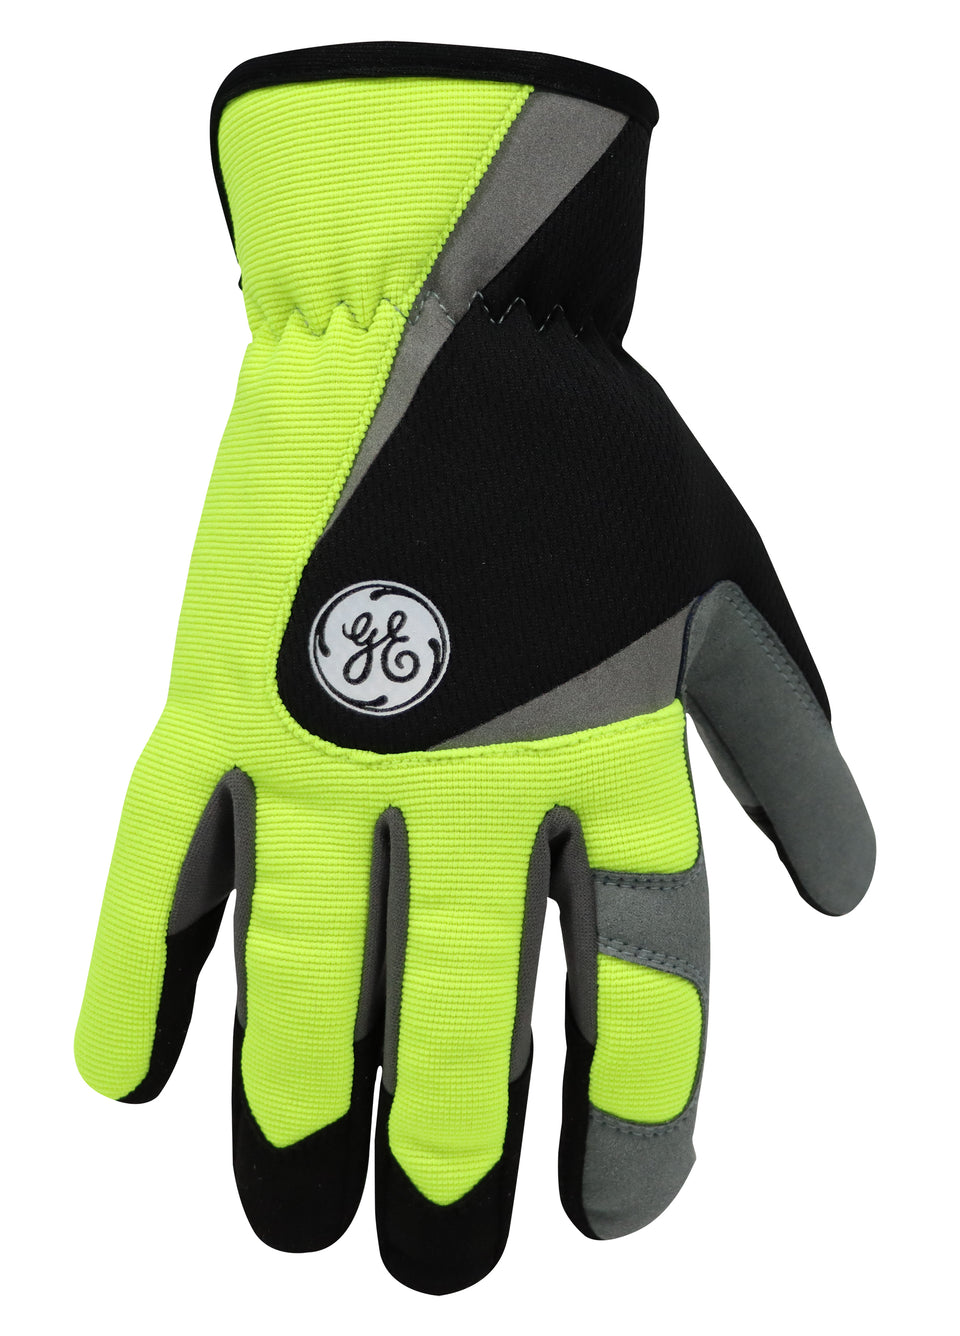 The Importance of Impact Protection in Safety Gloves - PK Safety